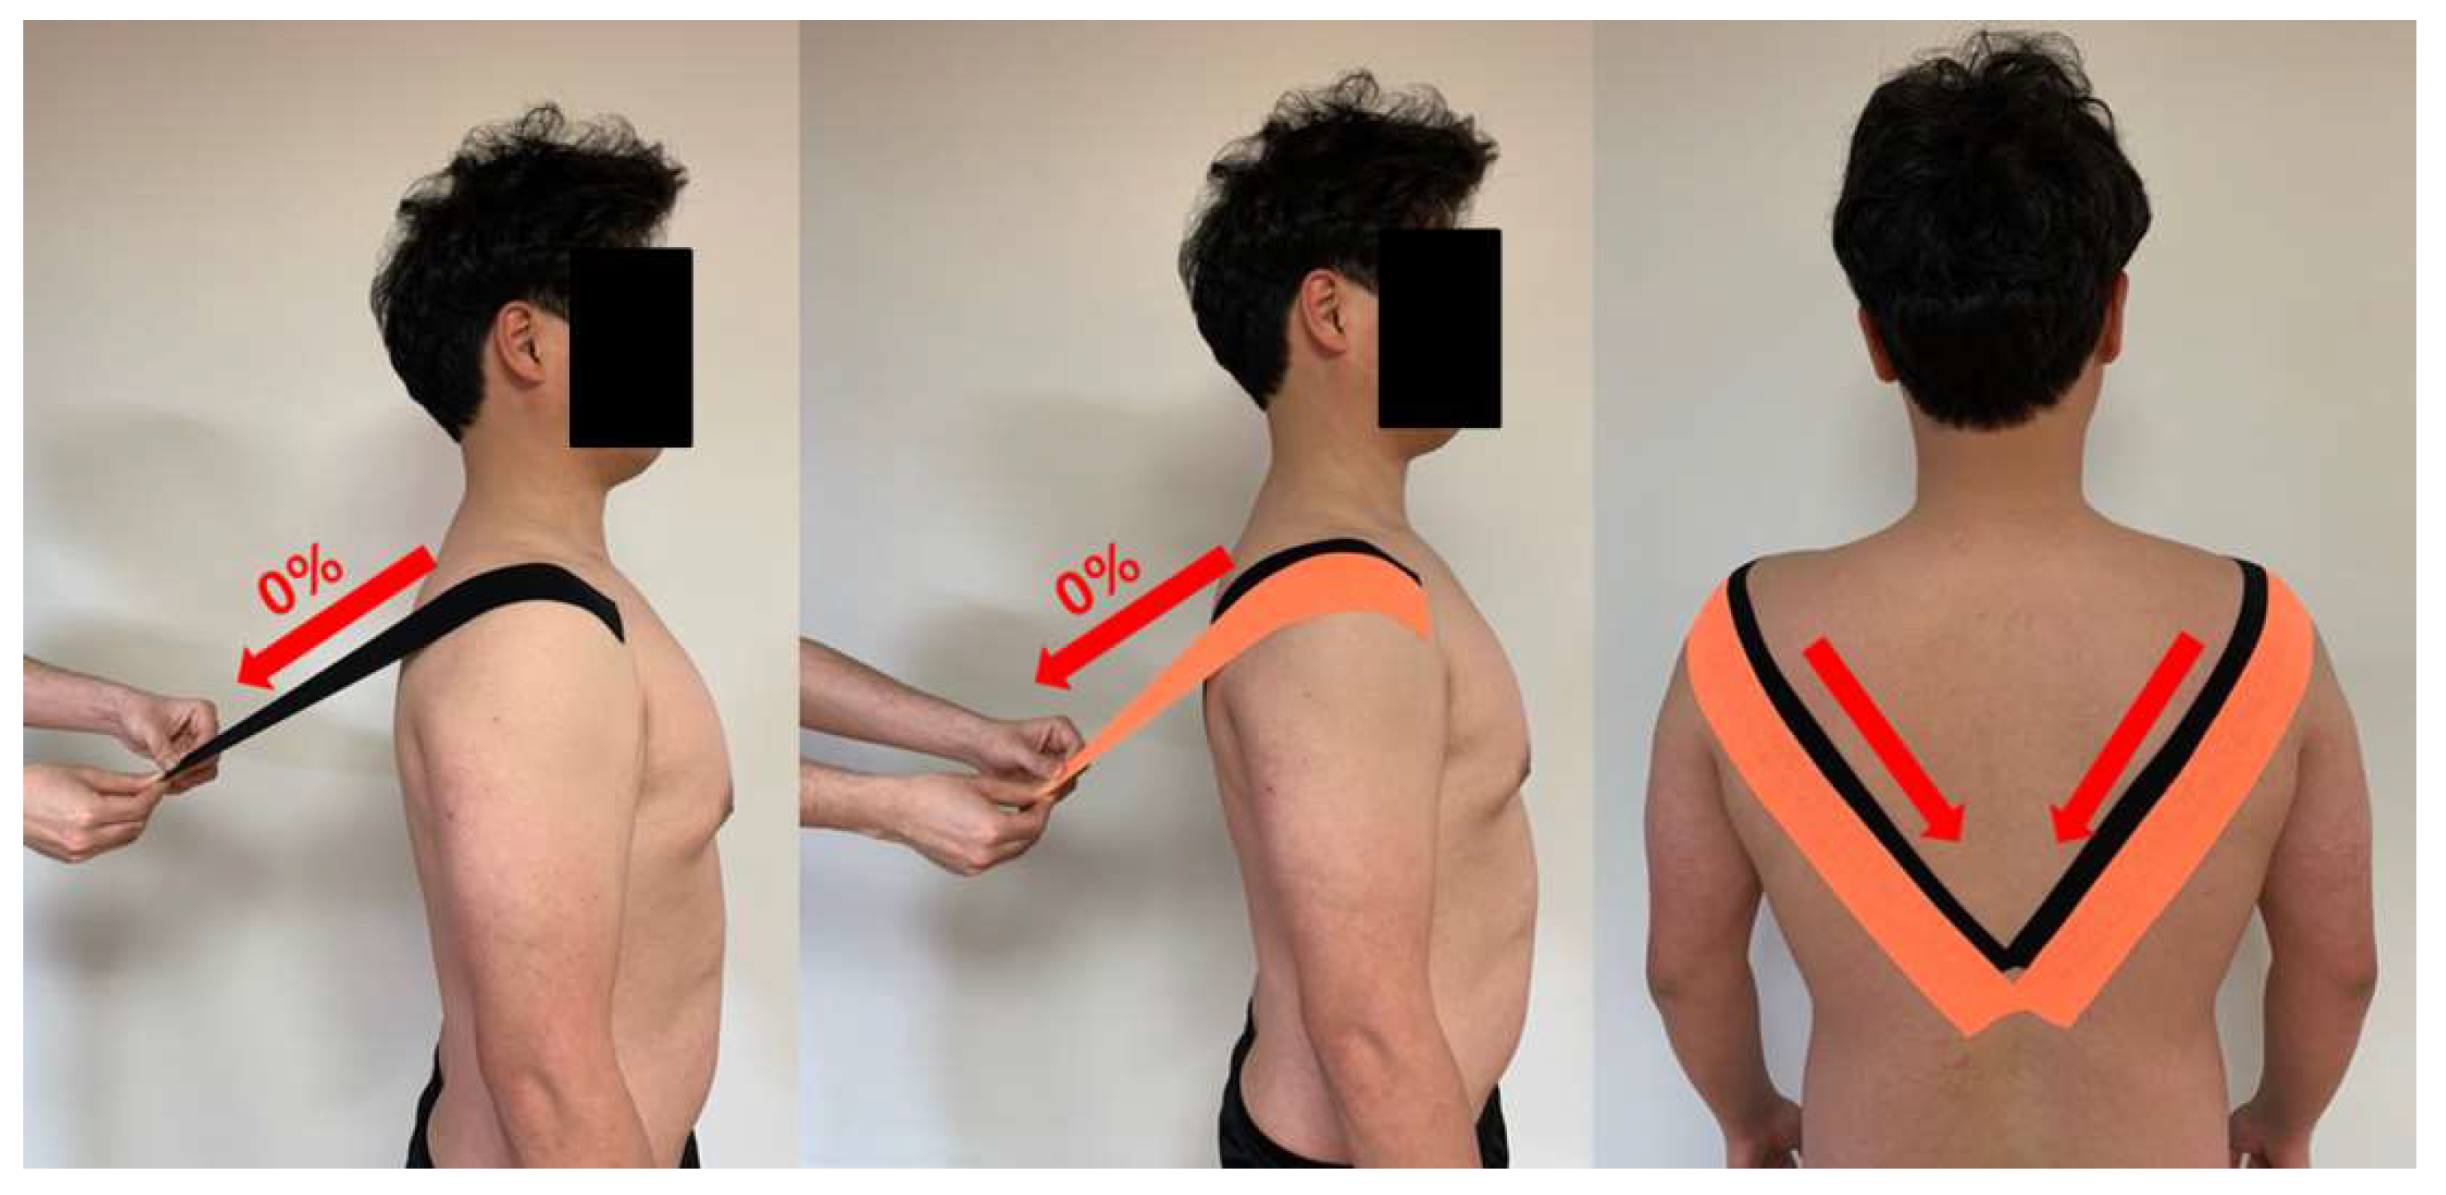 Life | Free Full-Text | Effects of Kinesiology Taping on Shoulder Posture  and Peak Torque in Junior Baseball Players with Rounded Shoulder Posture: A  Pilot Study | HTML